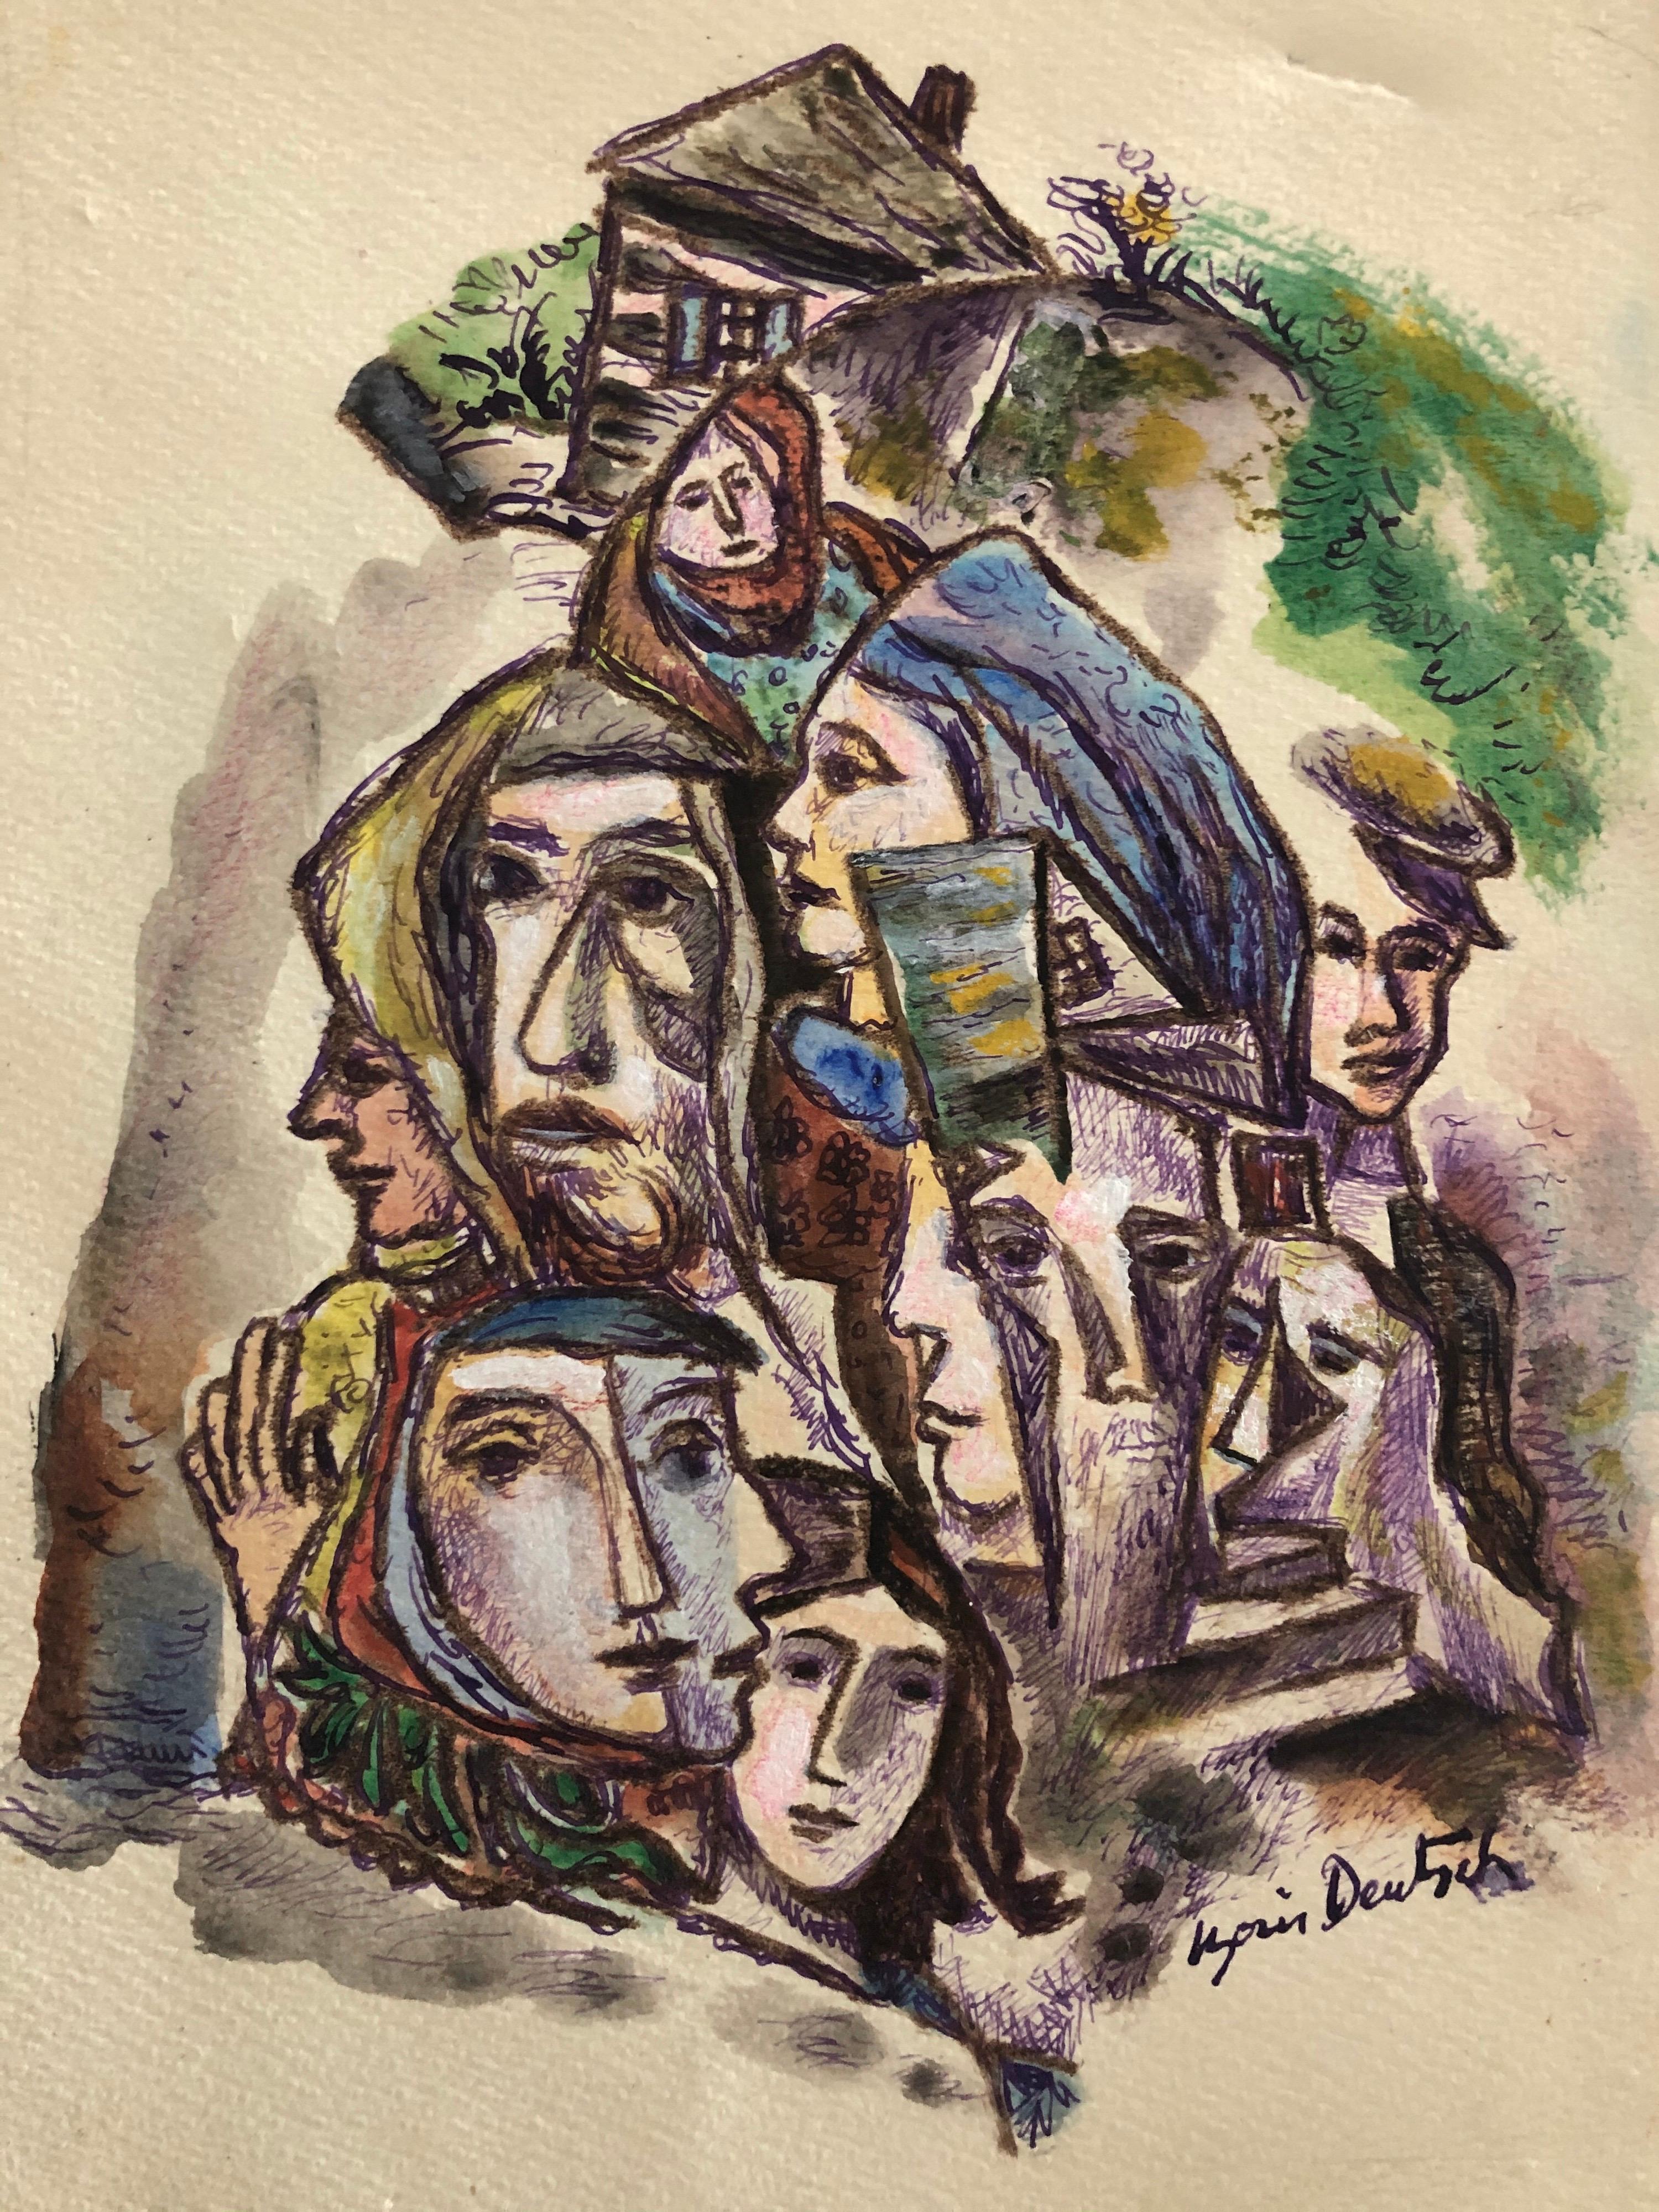 Boris Deutsch Portrait - Abstract Houses and Faces Ink Drawing and Watercolor Painting Shtetl Judaica 